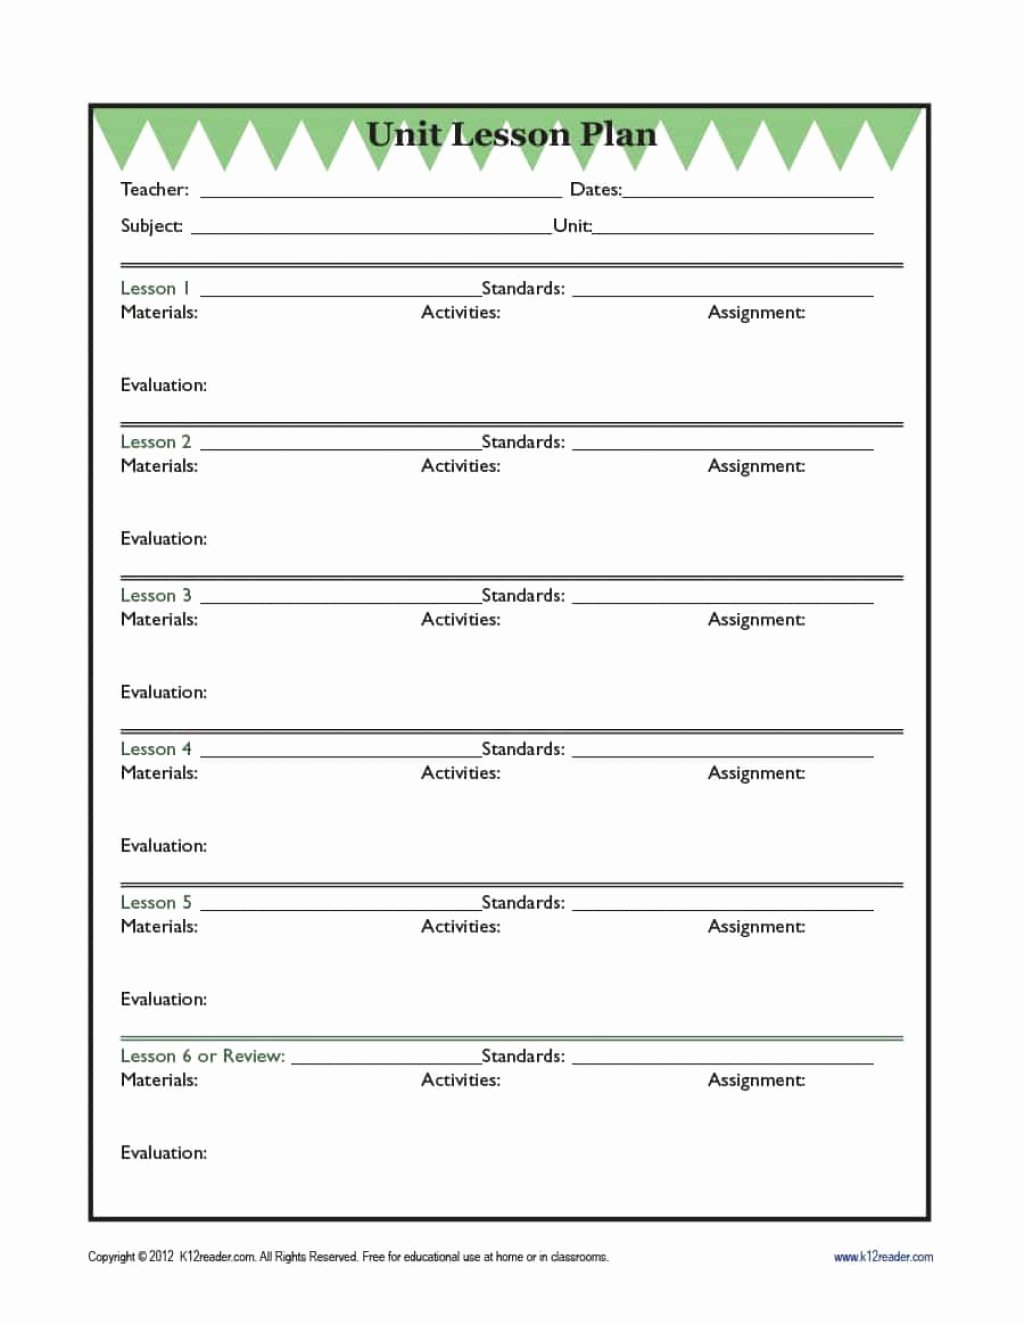 Elementary Music Lesson Plan Template Awesome 015 Music Lesson Plan Template Pdf Unit Tinypetition